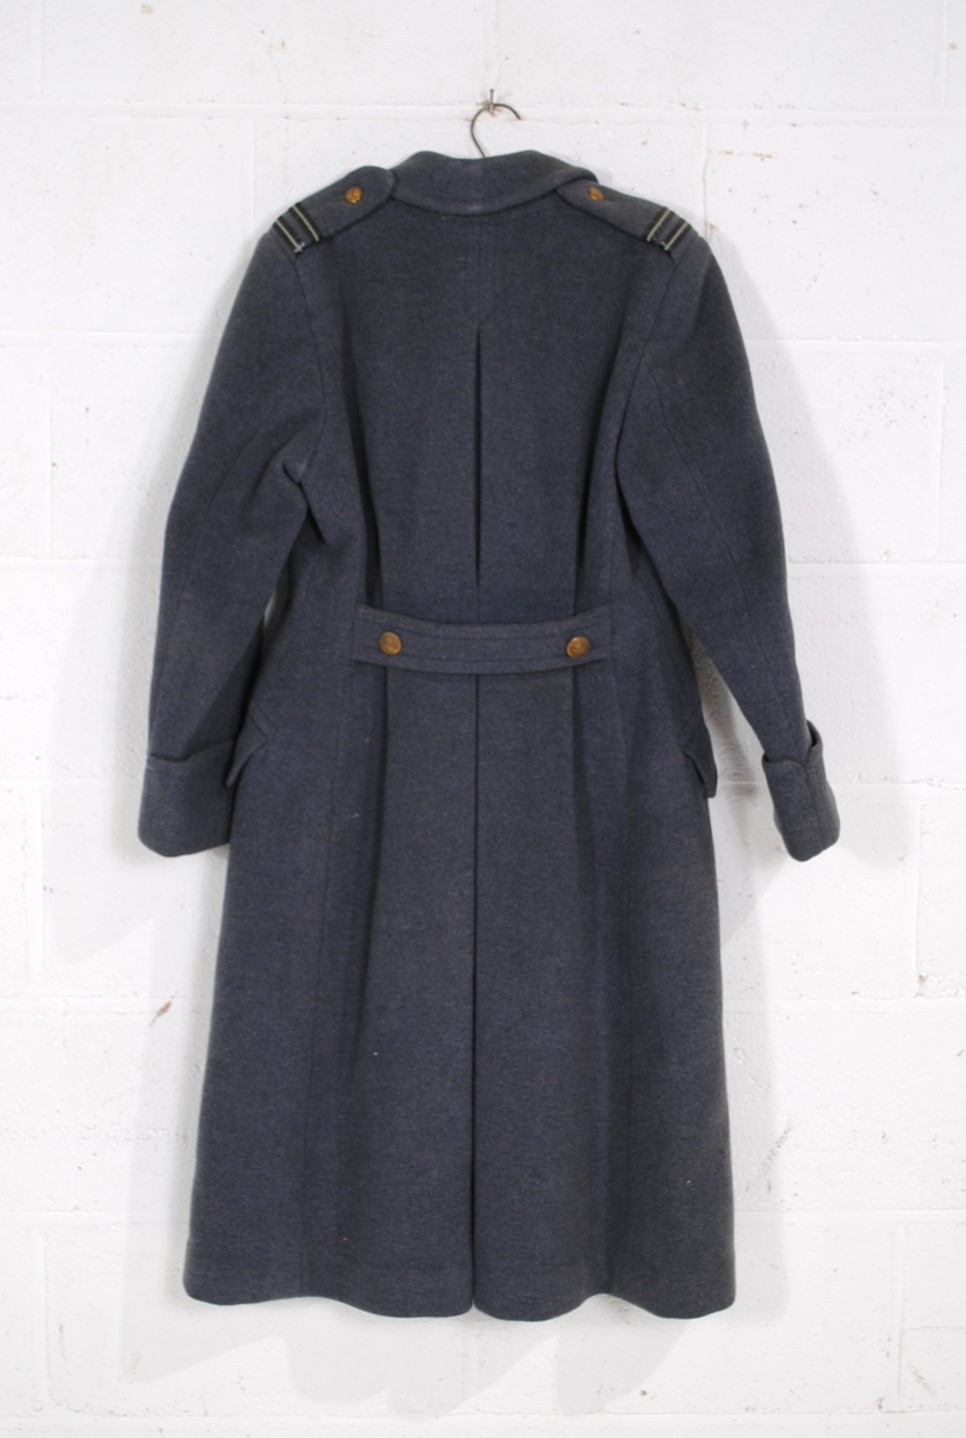 A 'Crombie' RAF great coat - Image 6 of 6